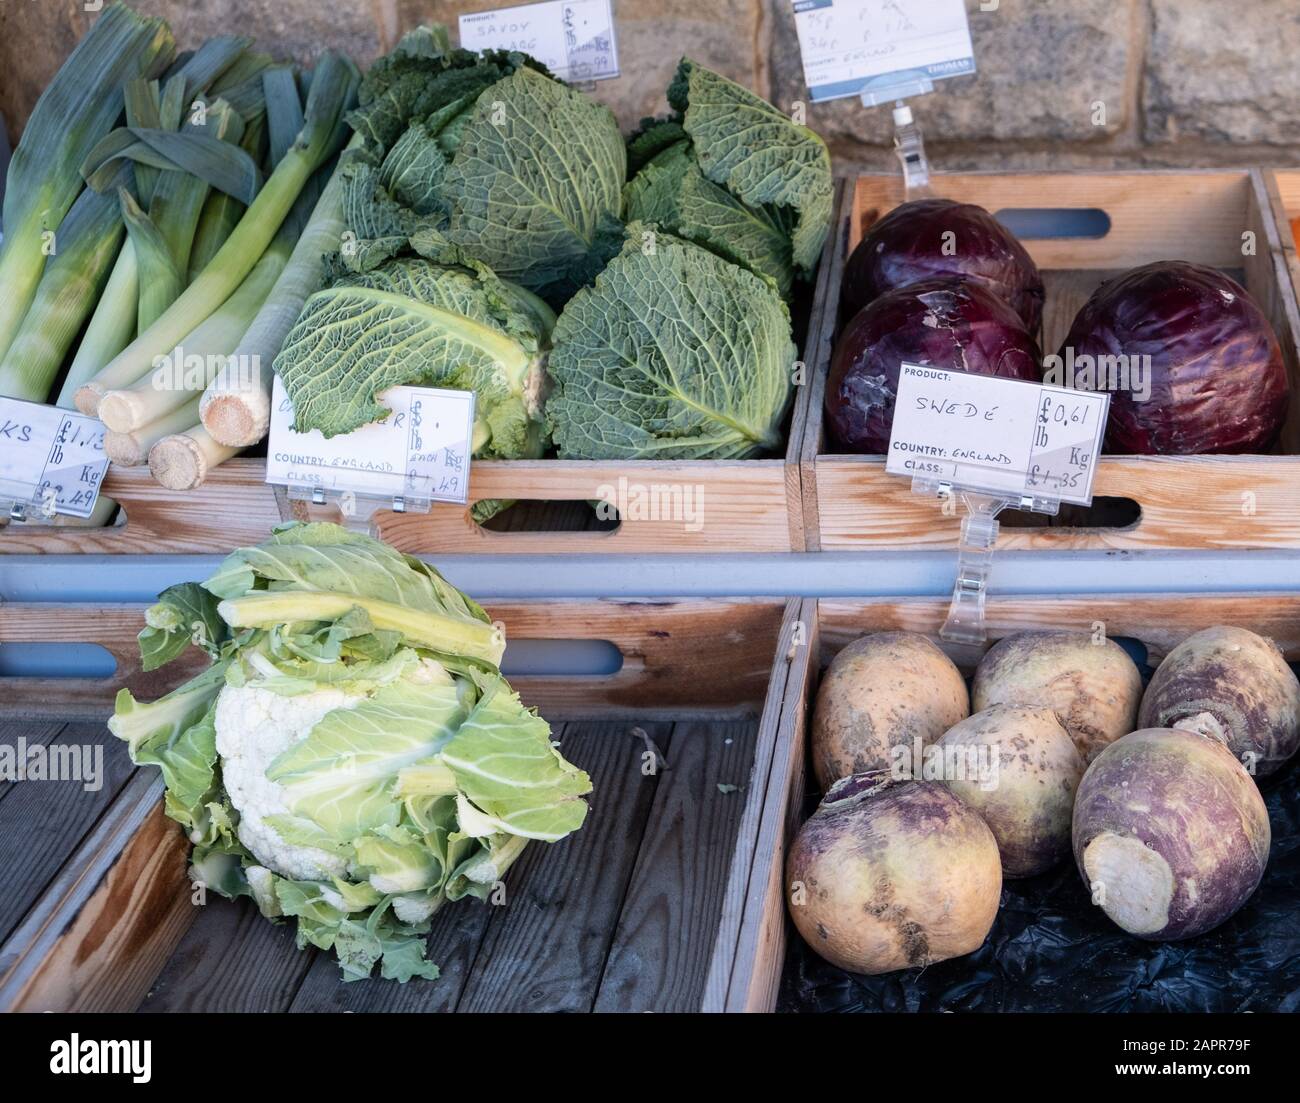 Local english grown vegetables at a farm shop, winter vegetables leeks, cauliflower, cabbage and swede Stock Photo